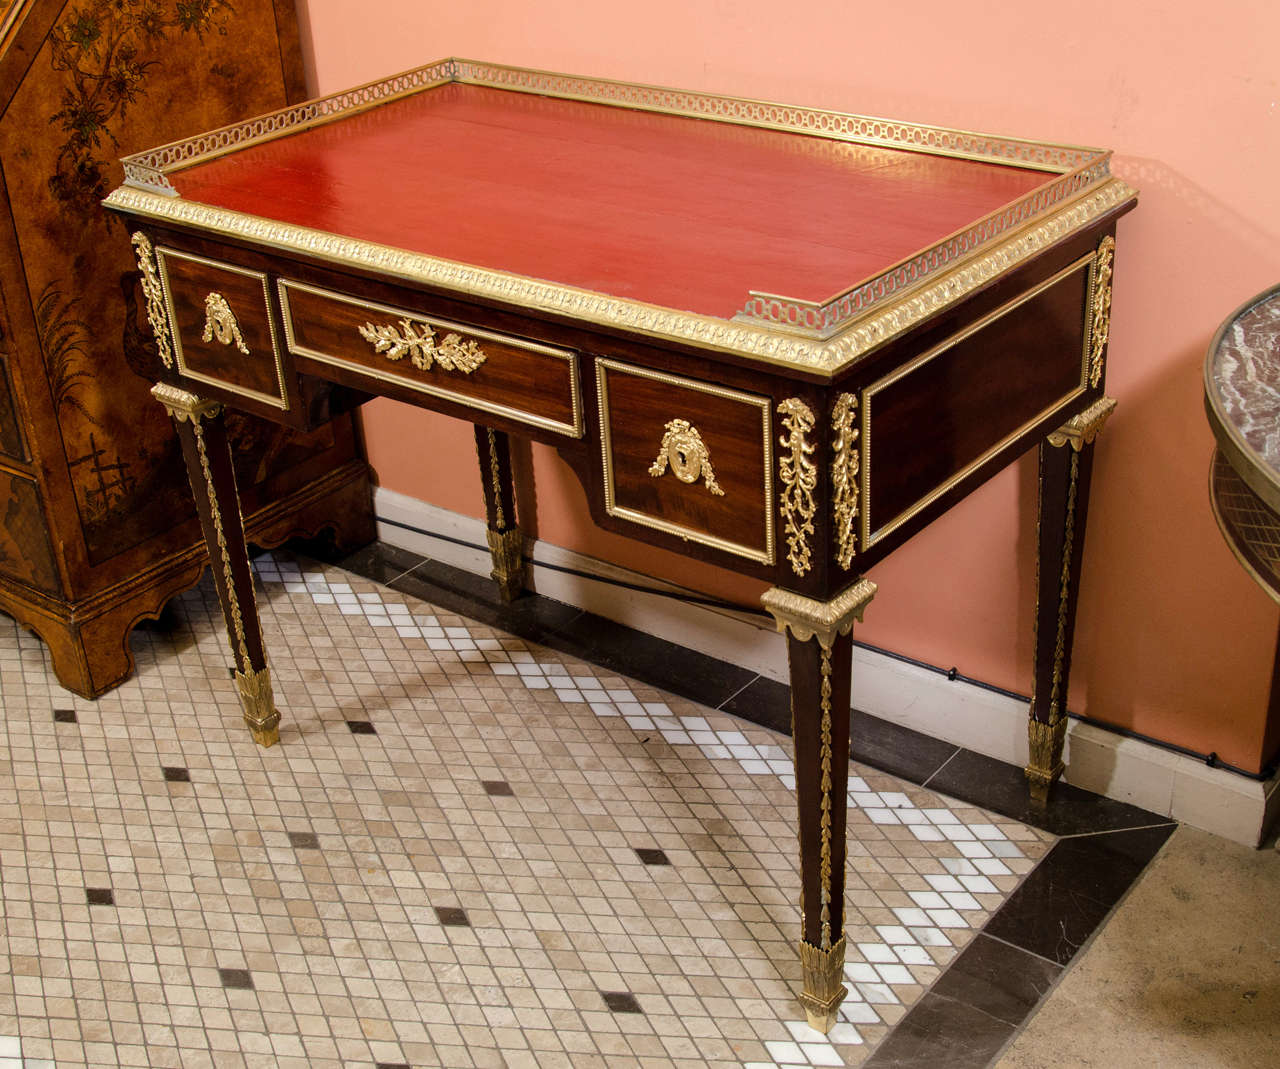 A very fine French Acajou Bureau Plat with red finished writing surface,  pierced bronze gallery and trim, bronze mounts and square tapered legs.